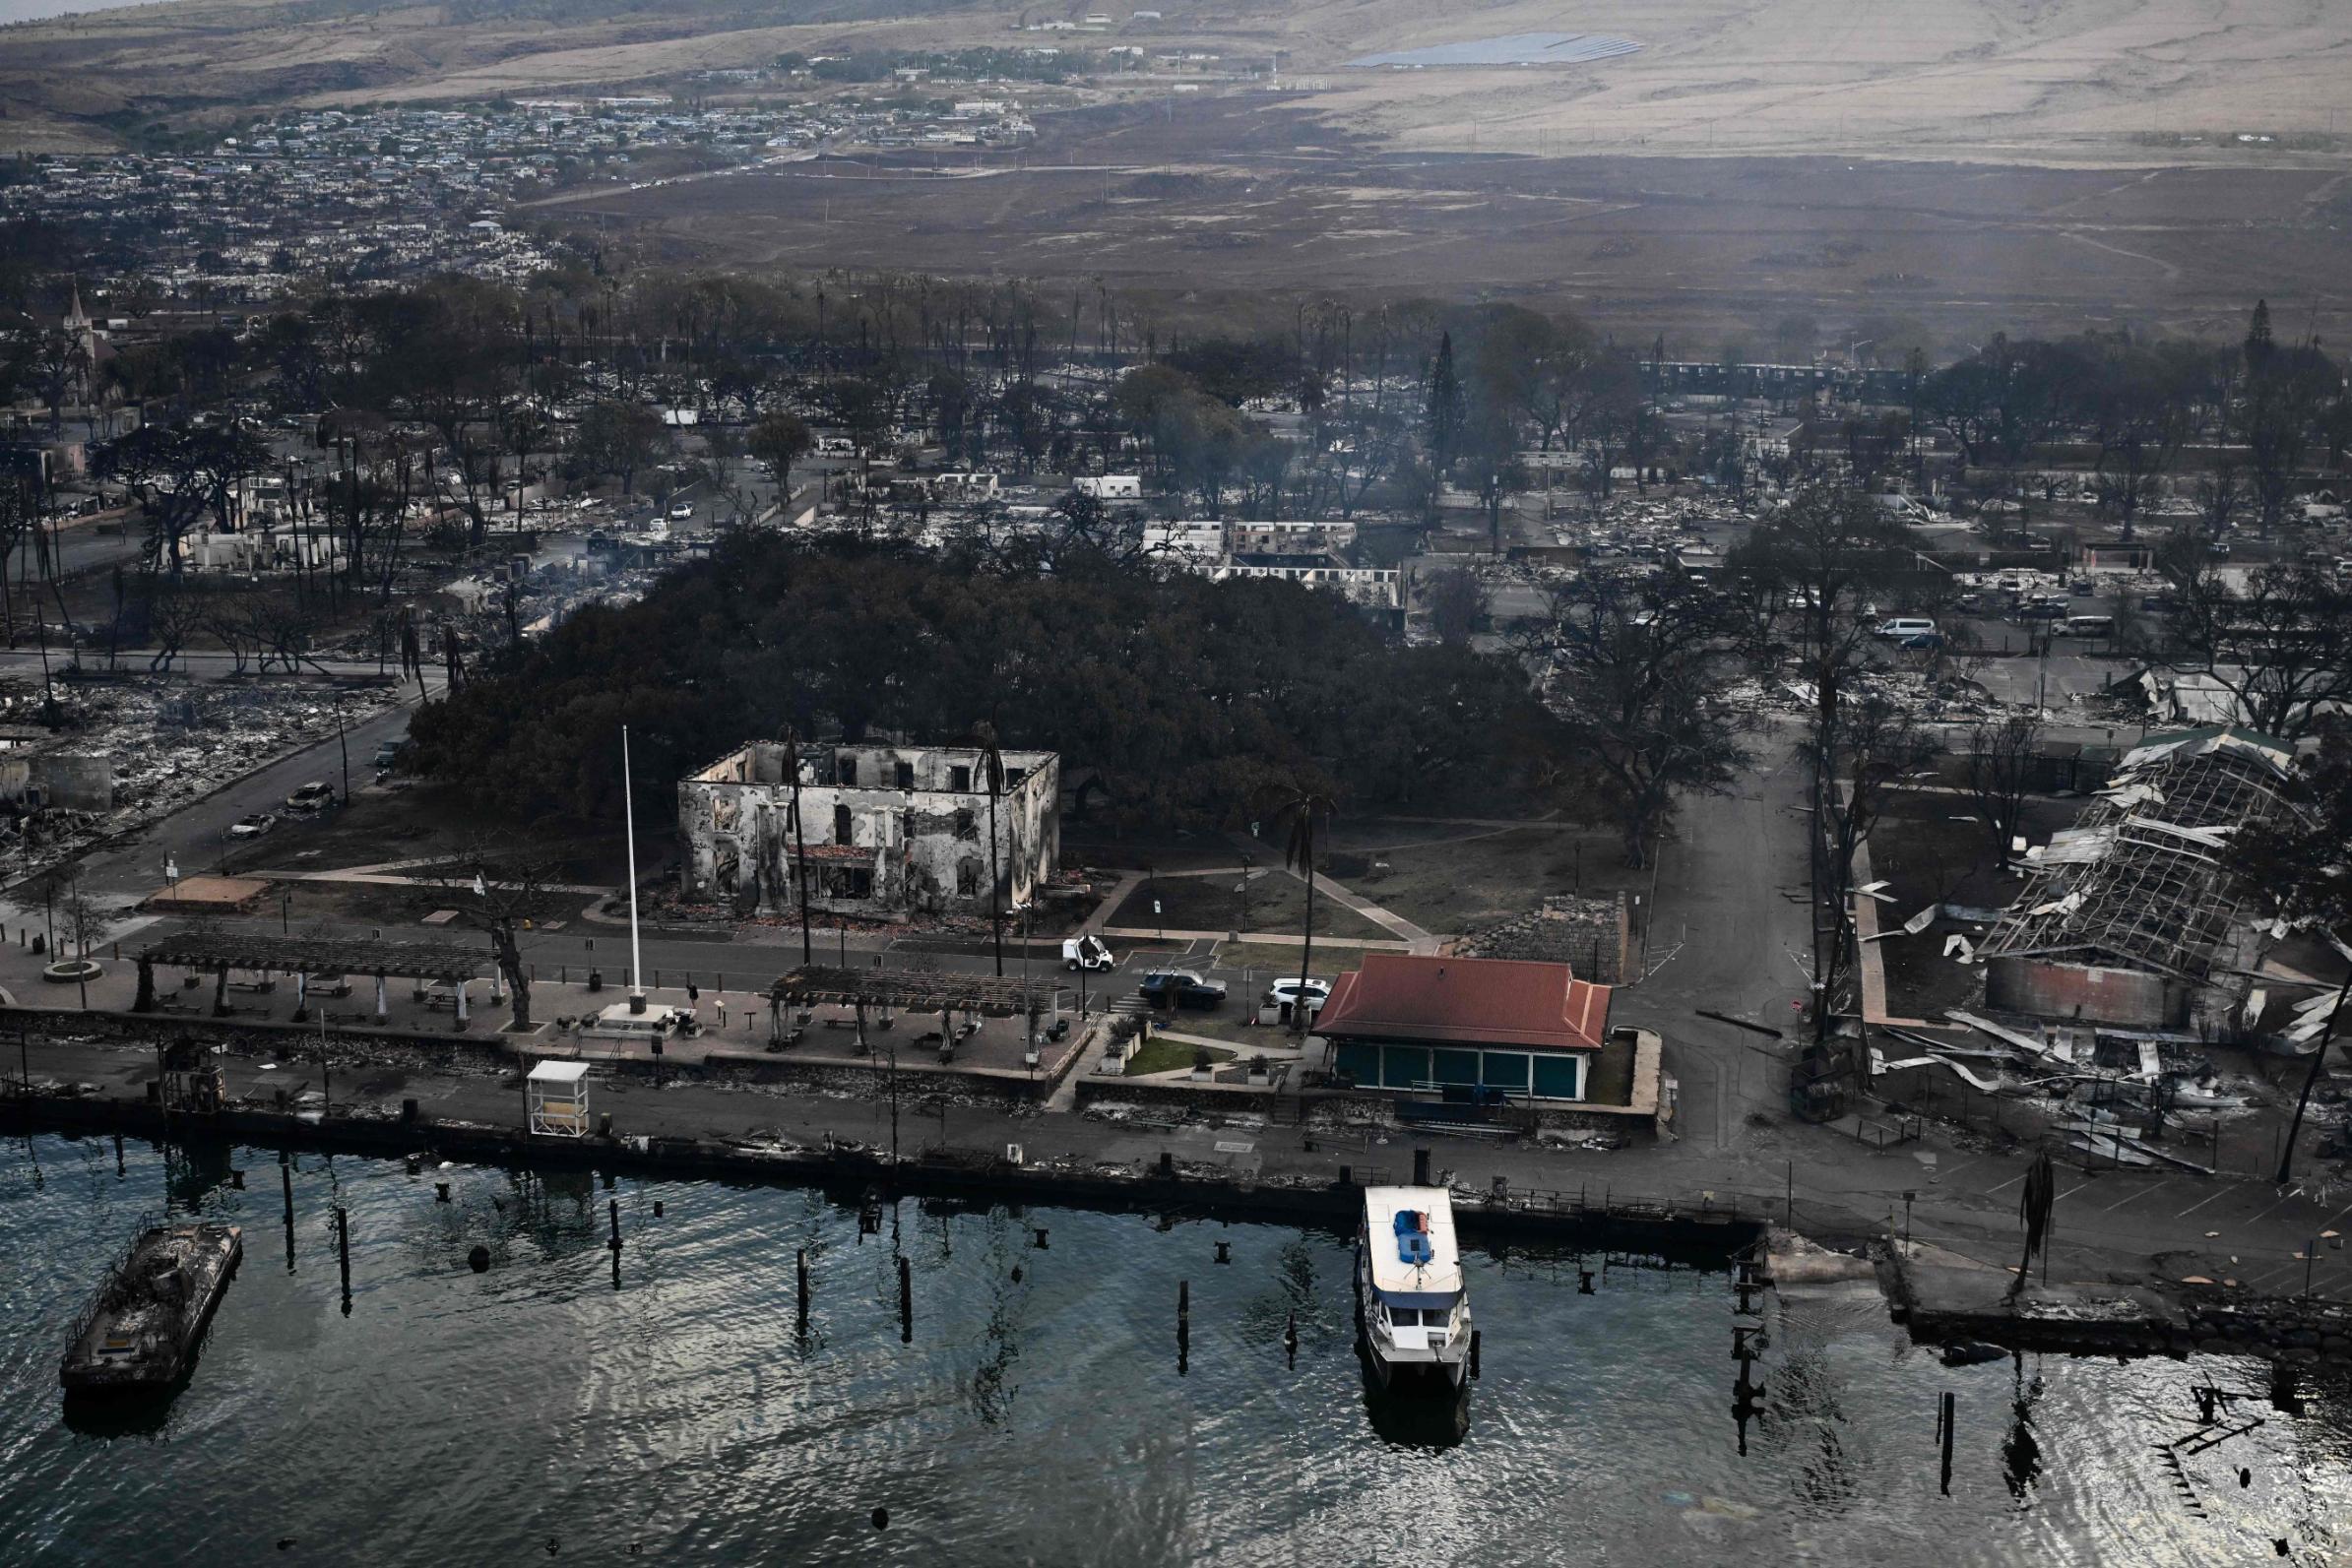 An aerial view shows the historic Banyan Tree along with destroyed homes, boats, and buildings burned to the ground in the historic Lahaina town in the aftermath of wildfires in western Maui in Lahaina, Hawaii, on August 10, 2023.